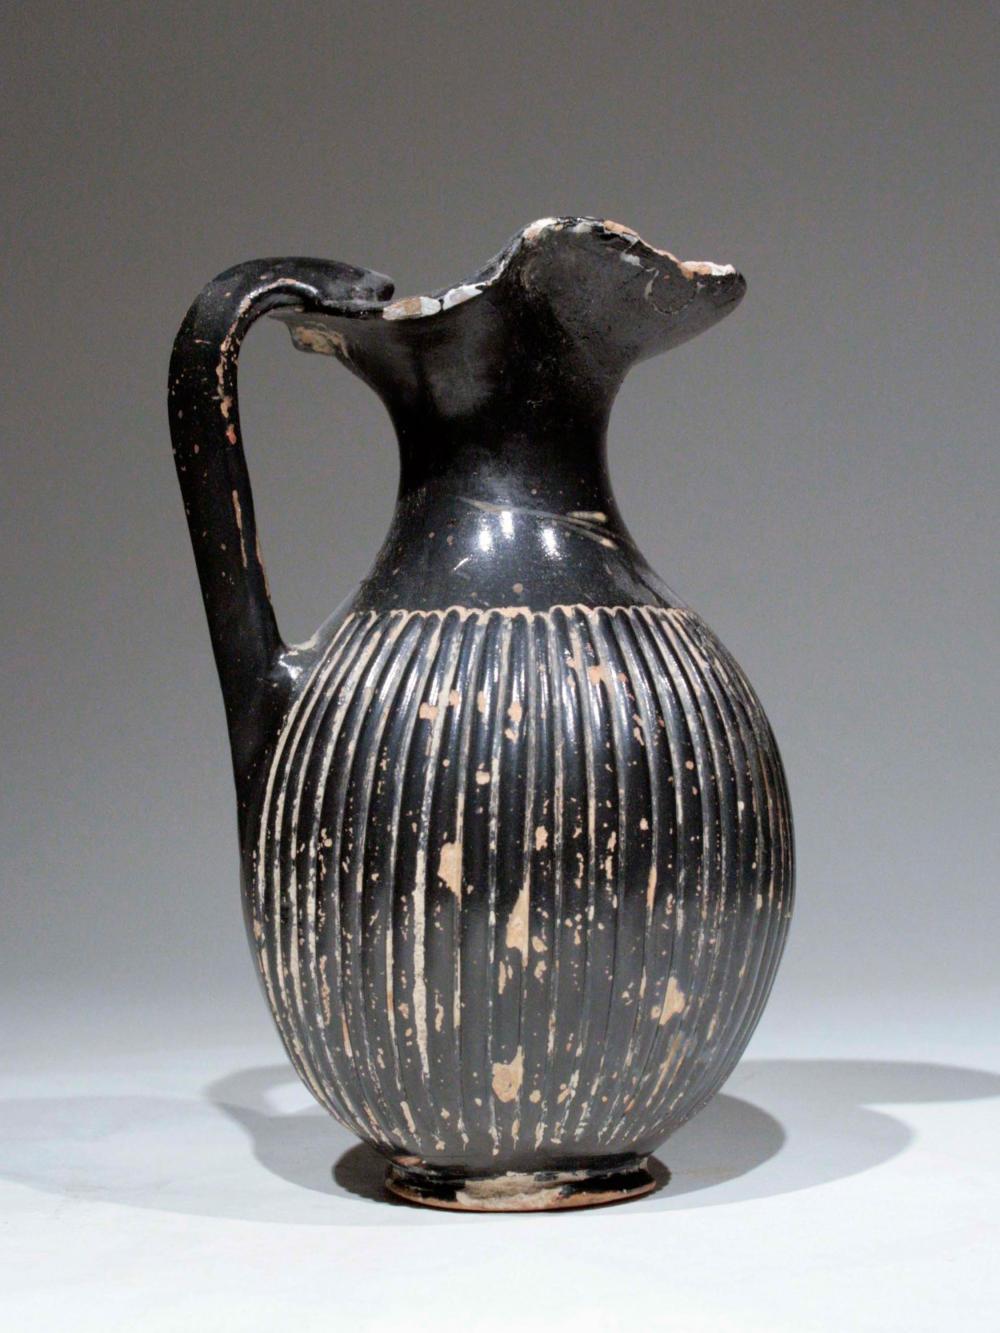 Oinochoe Greek, circa 350 BC., terracotta. H 13.2 cm.

Certified

Greece, Magna Graecia, Southern Italy, Apulia, circa 340-325 BCE. An oinochoe created in a pottery workshop in the Apulia region of southern Italy where potters were known for